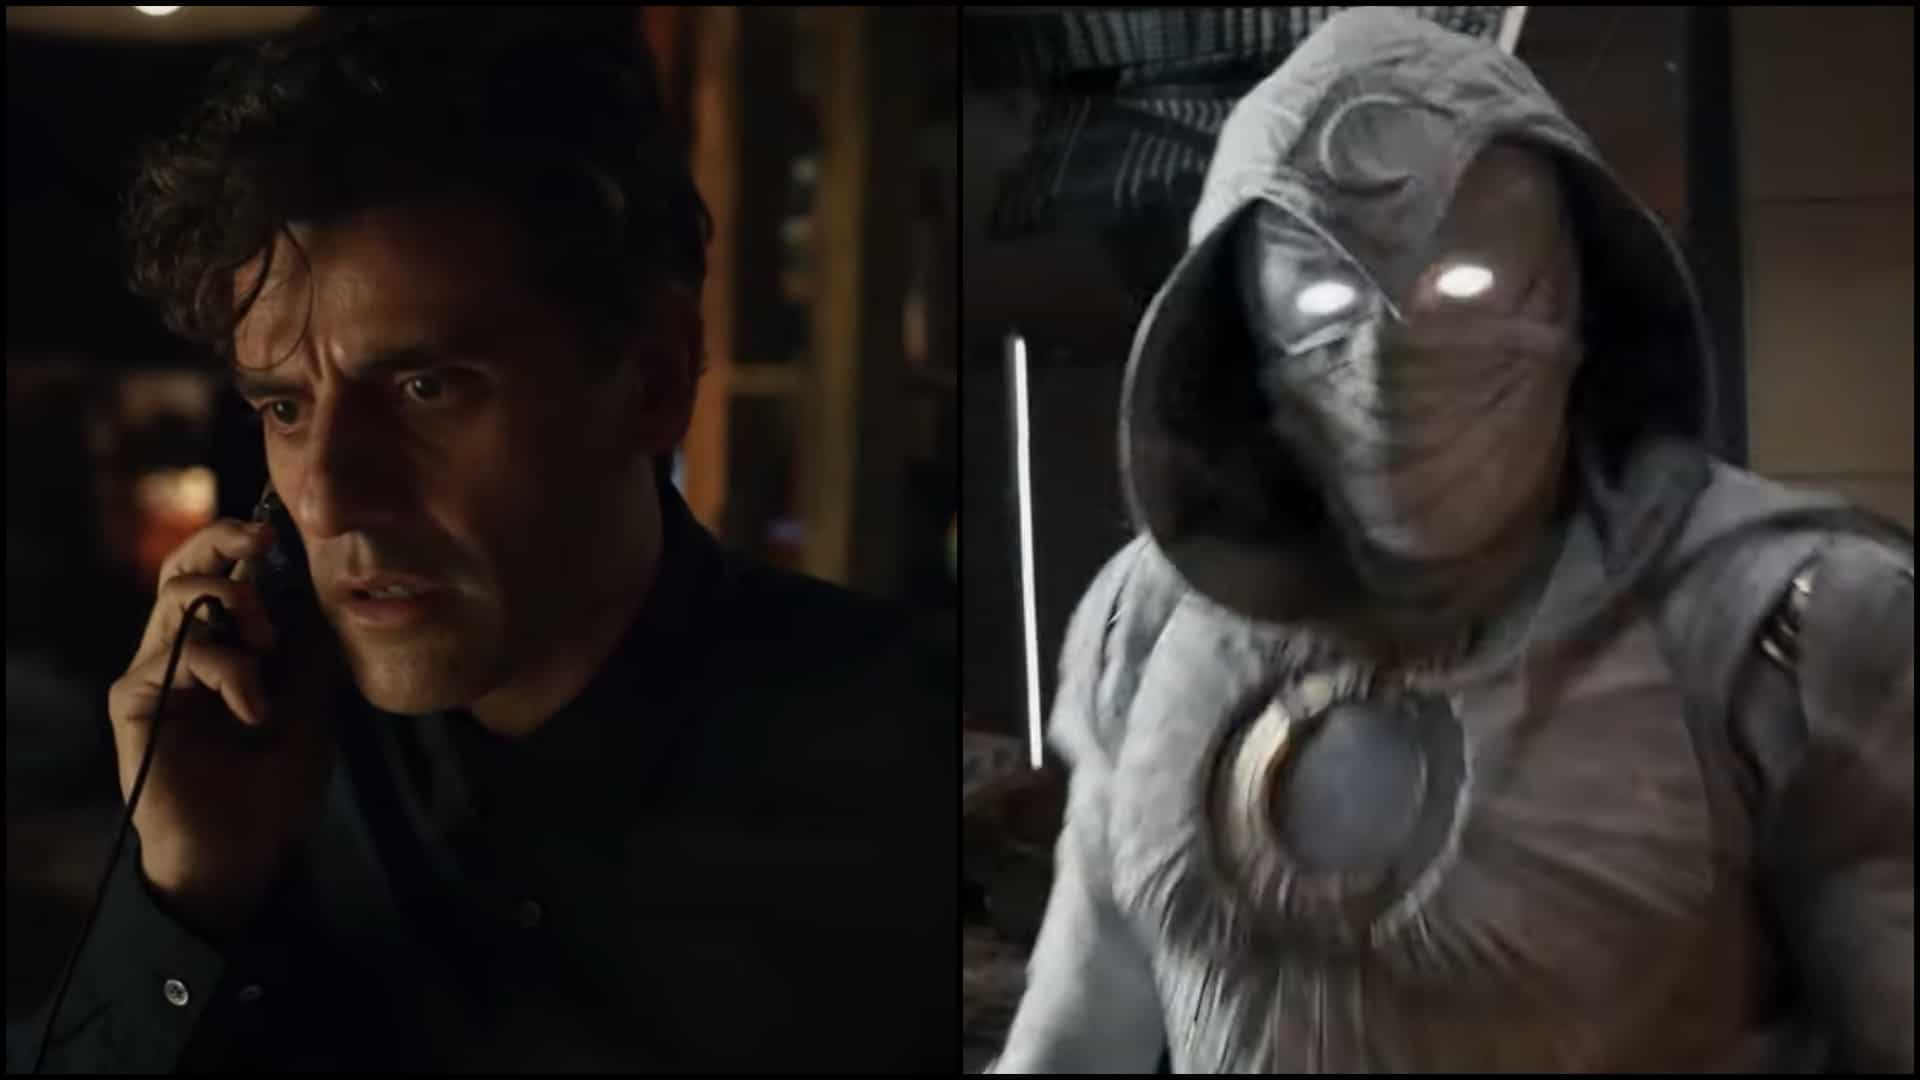 Moon Knight trailer: Oscar Isaac 'embraces chaos' in upcoming Marvel series